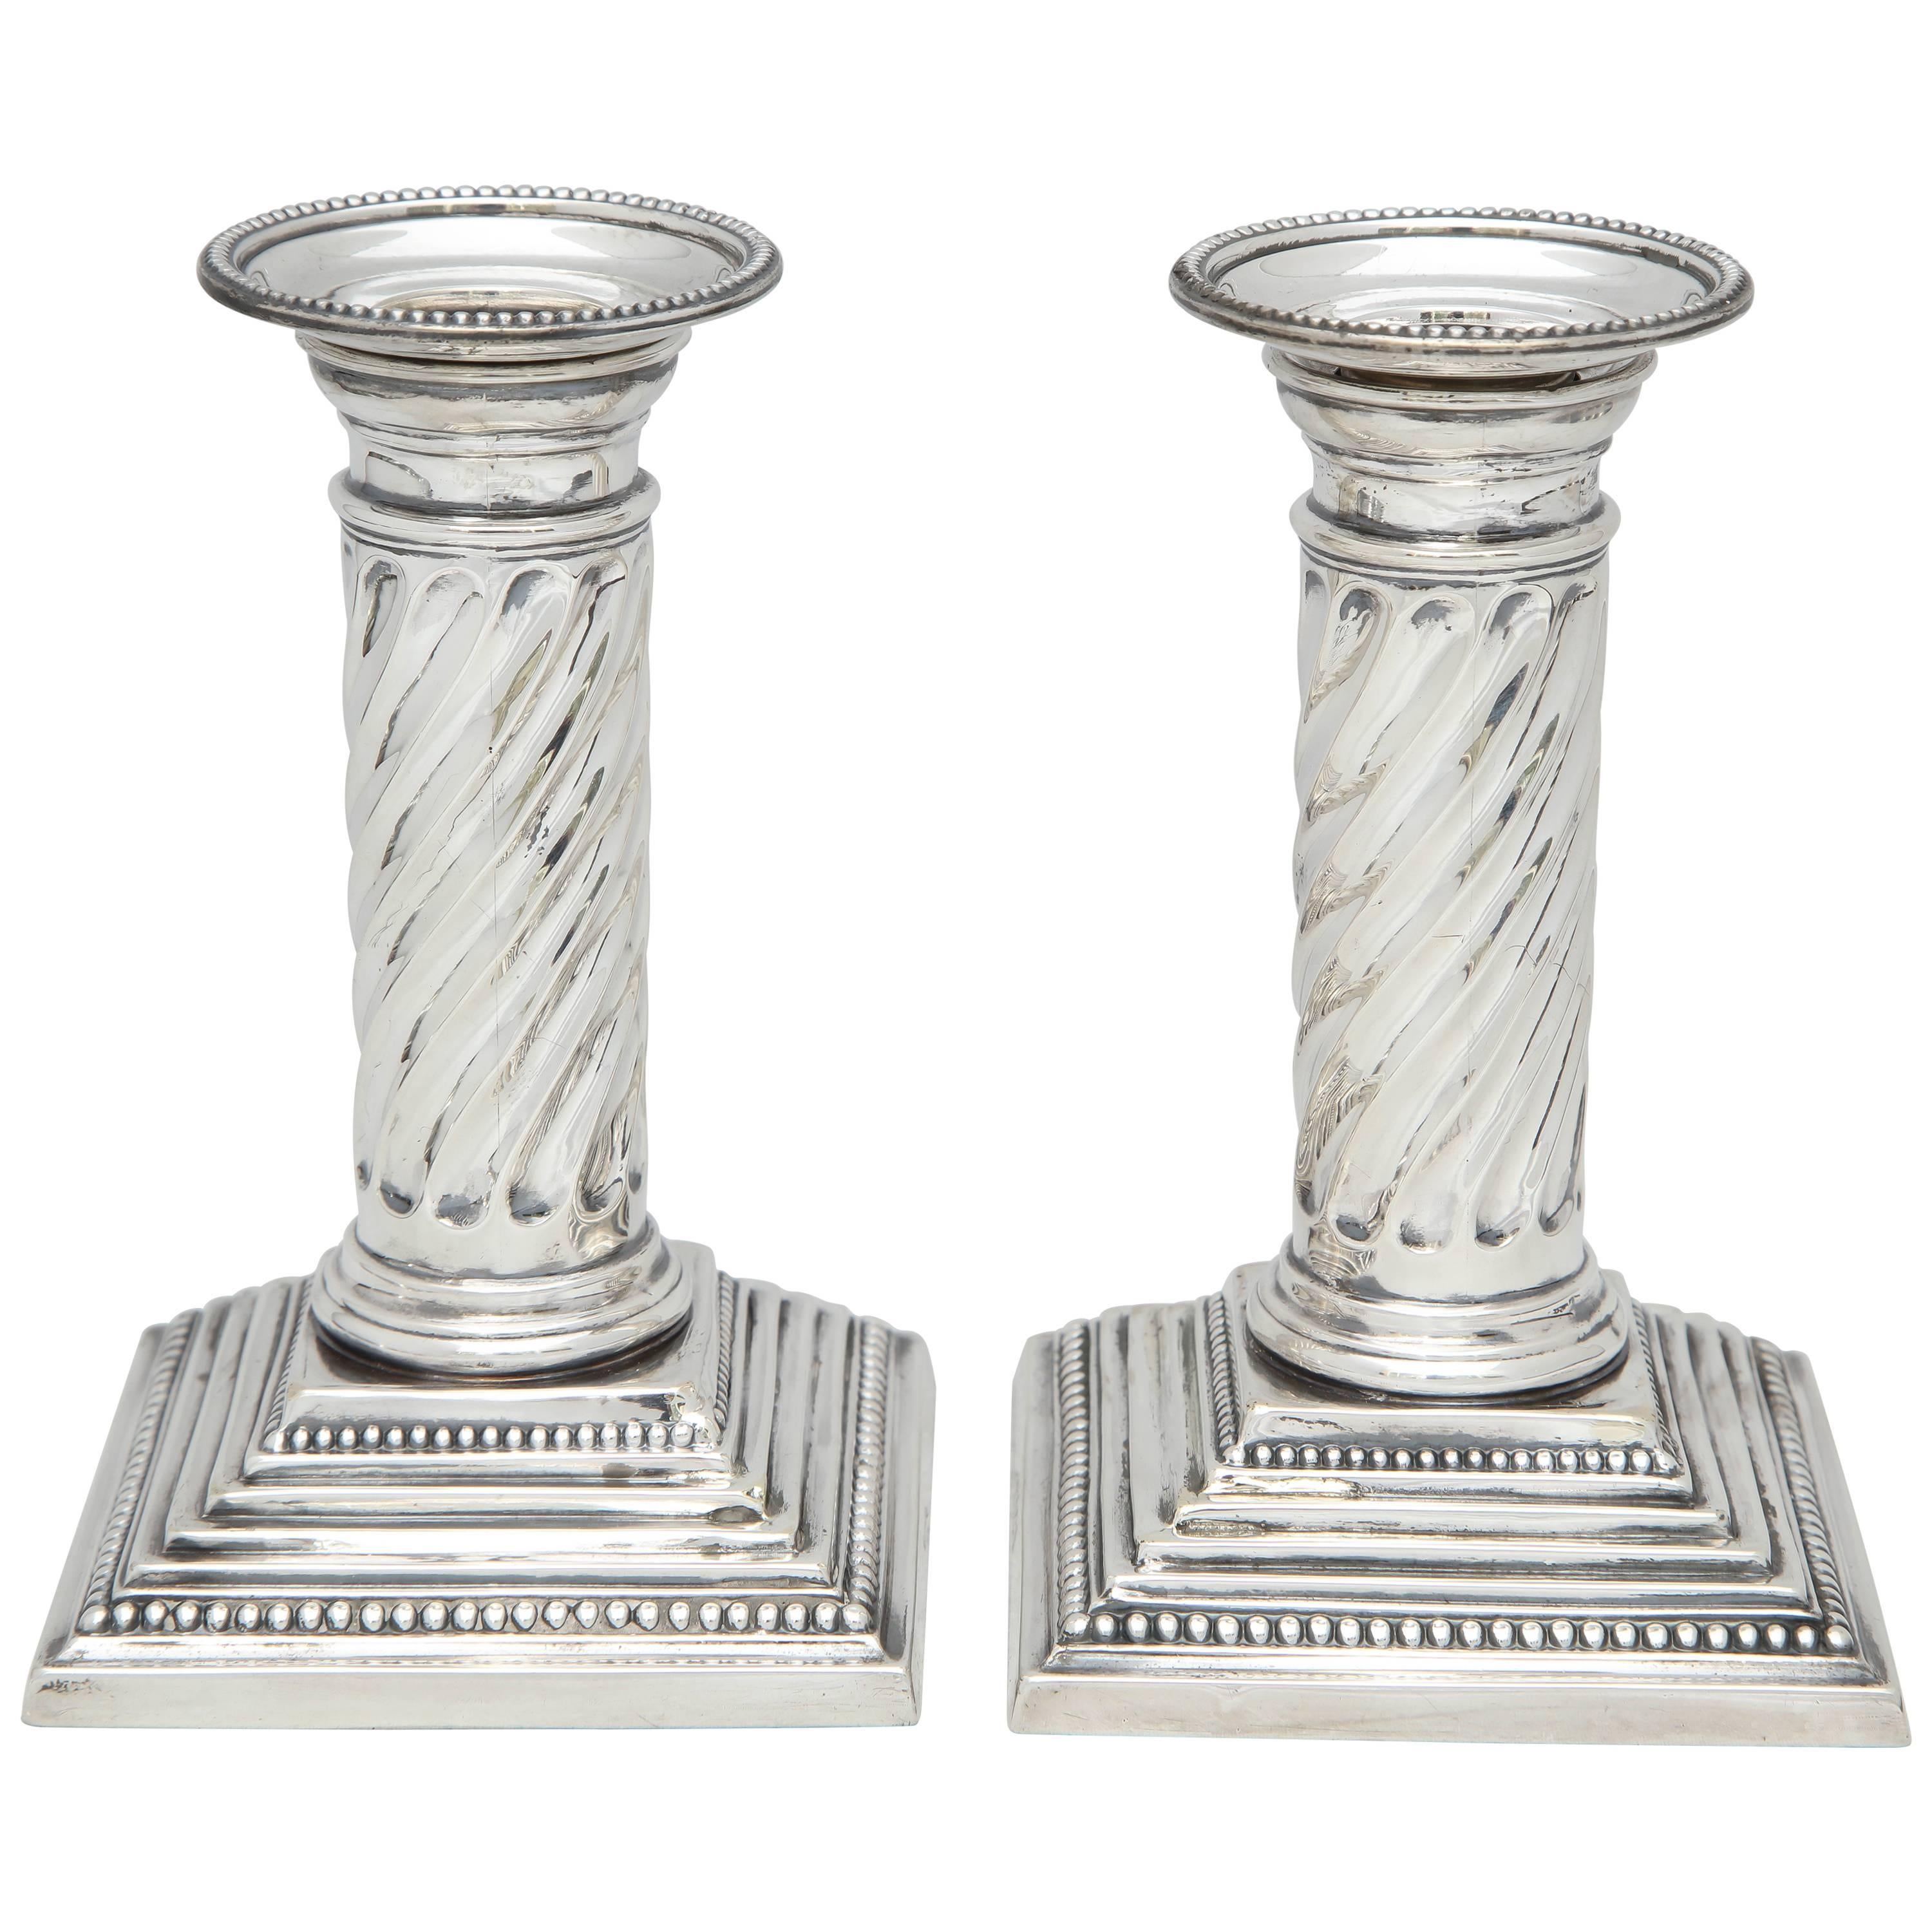 Pair of Edwardian Neoclassical Sterling Silver Column-Form Candlesticks